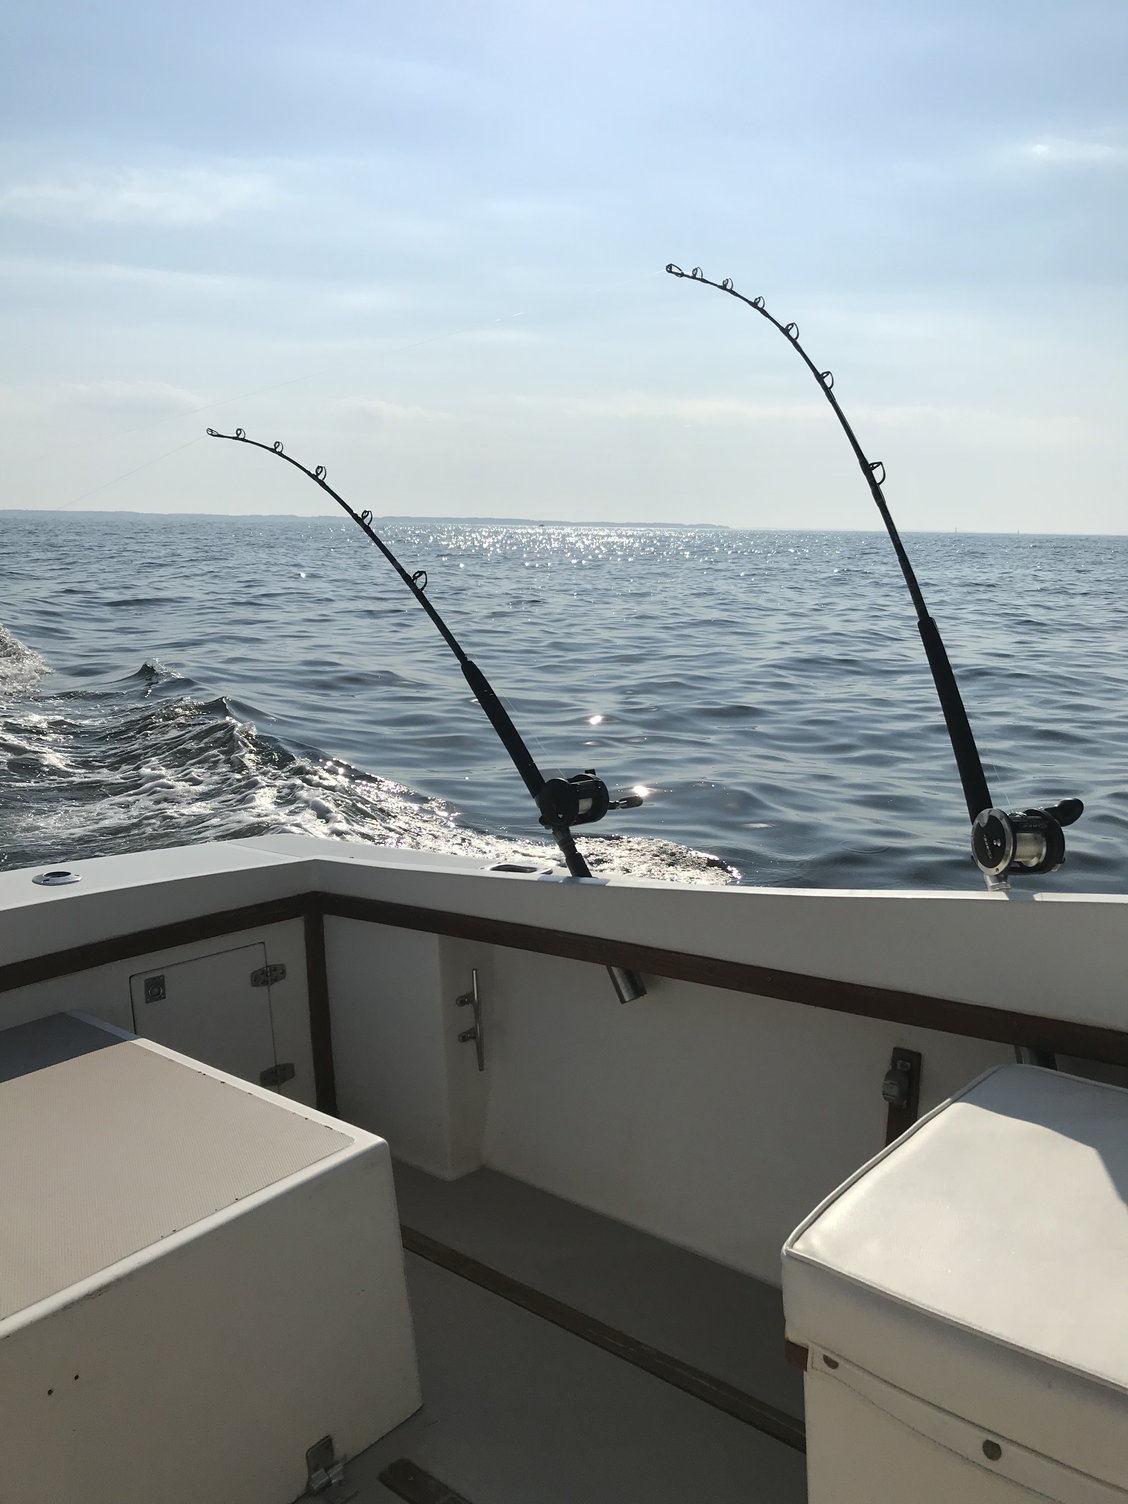 Best rod and reel for young kids? - The Hull Truth - Boating and Fishing  Forum